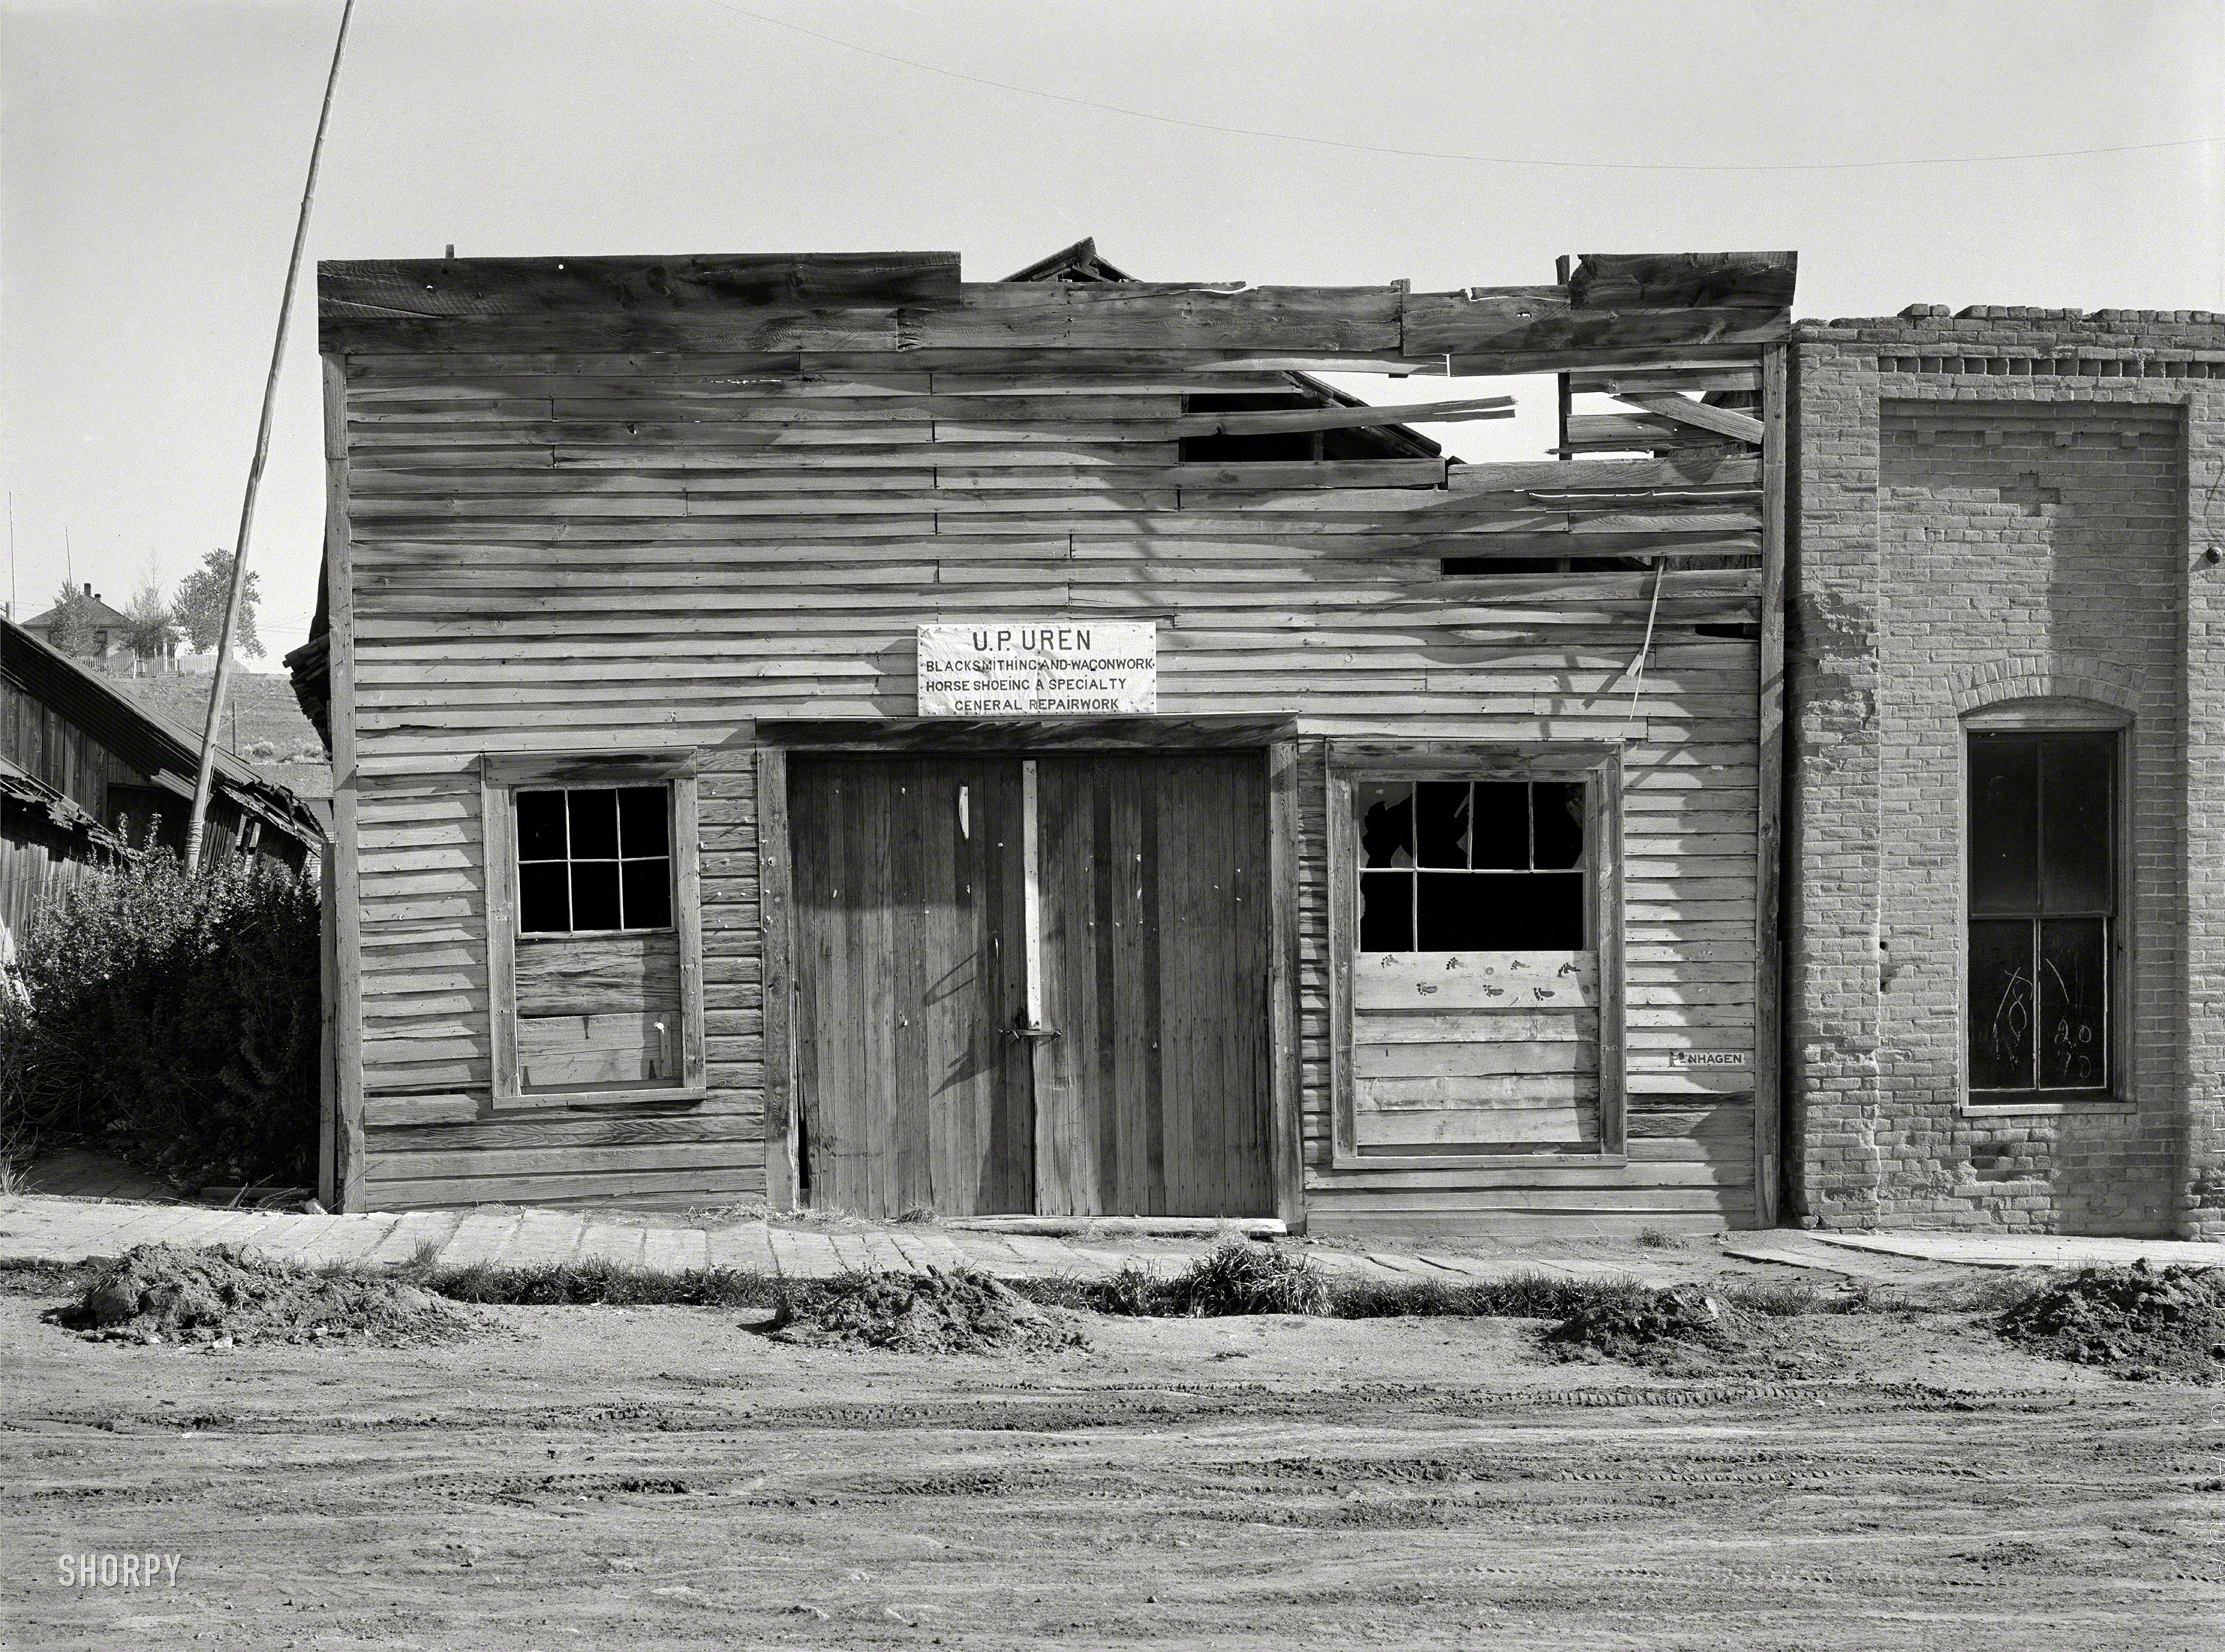 June 1939. "Ruins of blacksmith shop. Virginia City, Madison County, Montana." Photo by Arthur Rothstein for the Farm Security Administration. View full size.